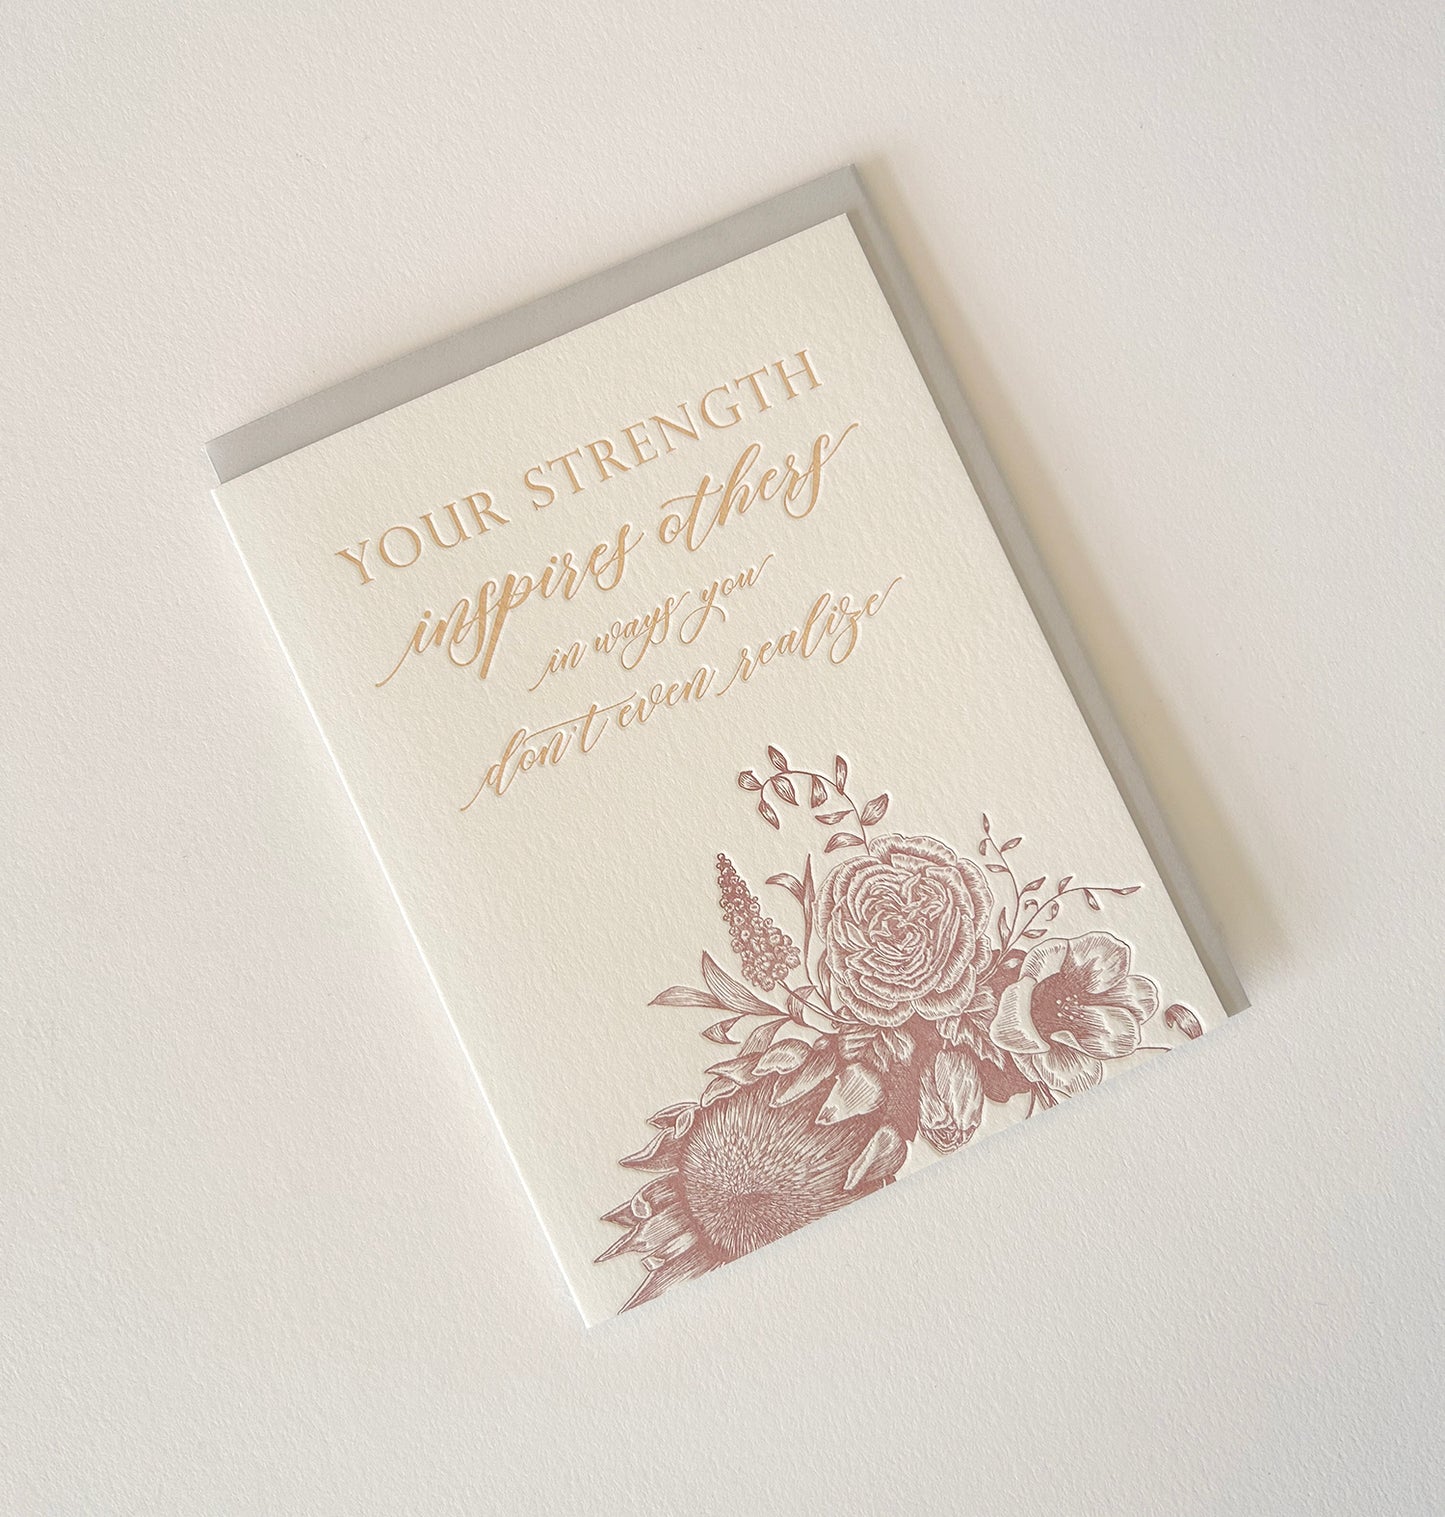 Letterpress friendship card with florals that says " Your strength inspires others in ways you don't even realize" by Rust Belt Love